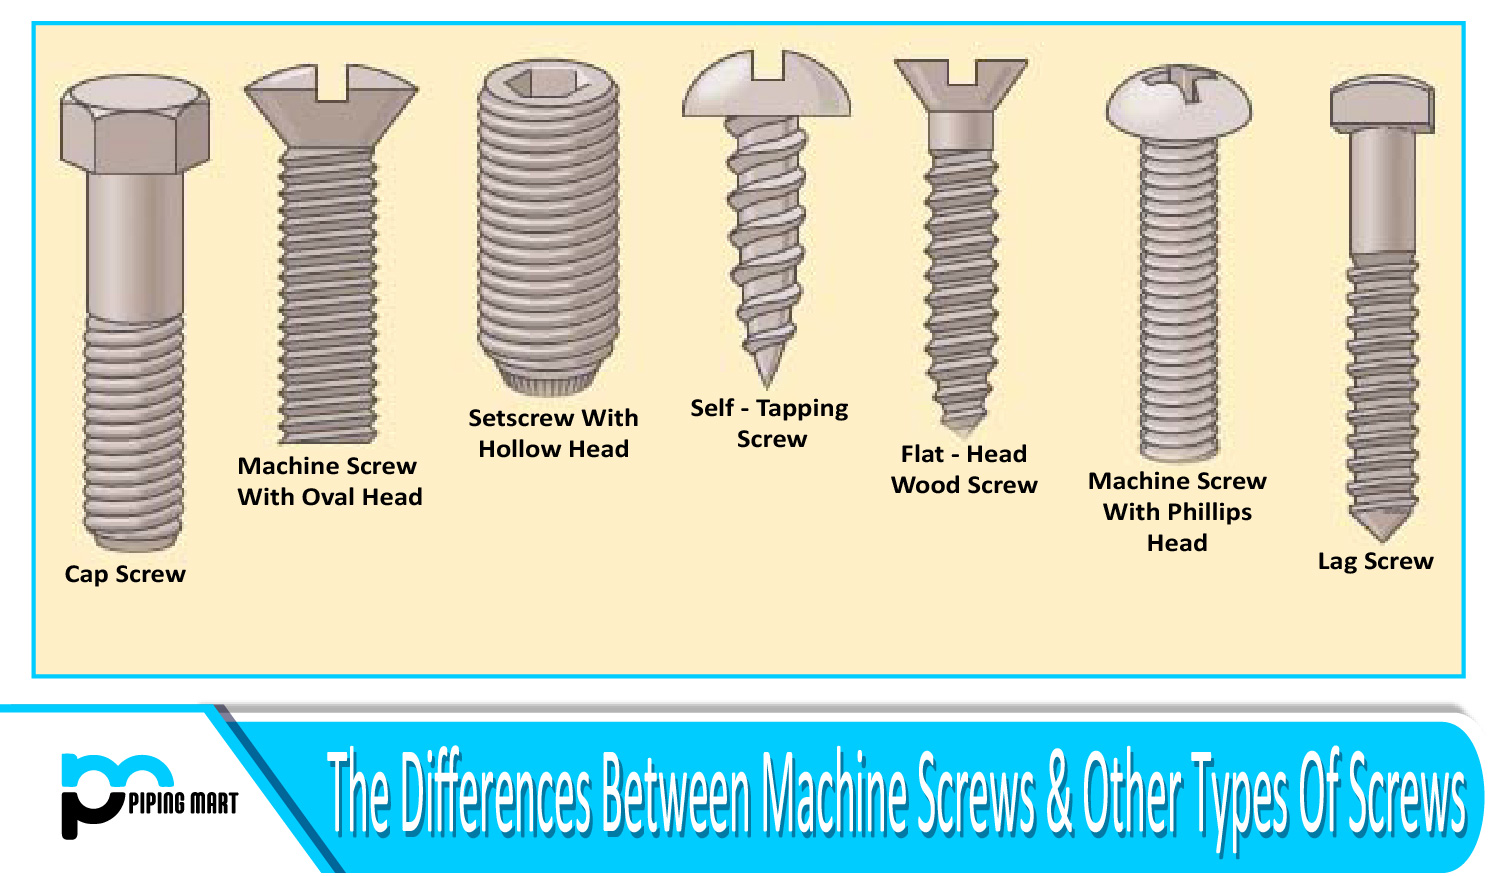 The Differences between Machine Screws and Other Types of Screws